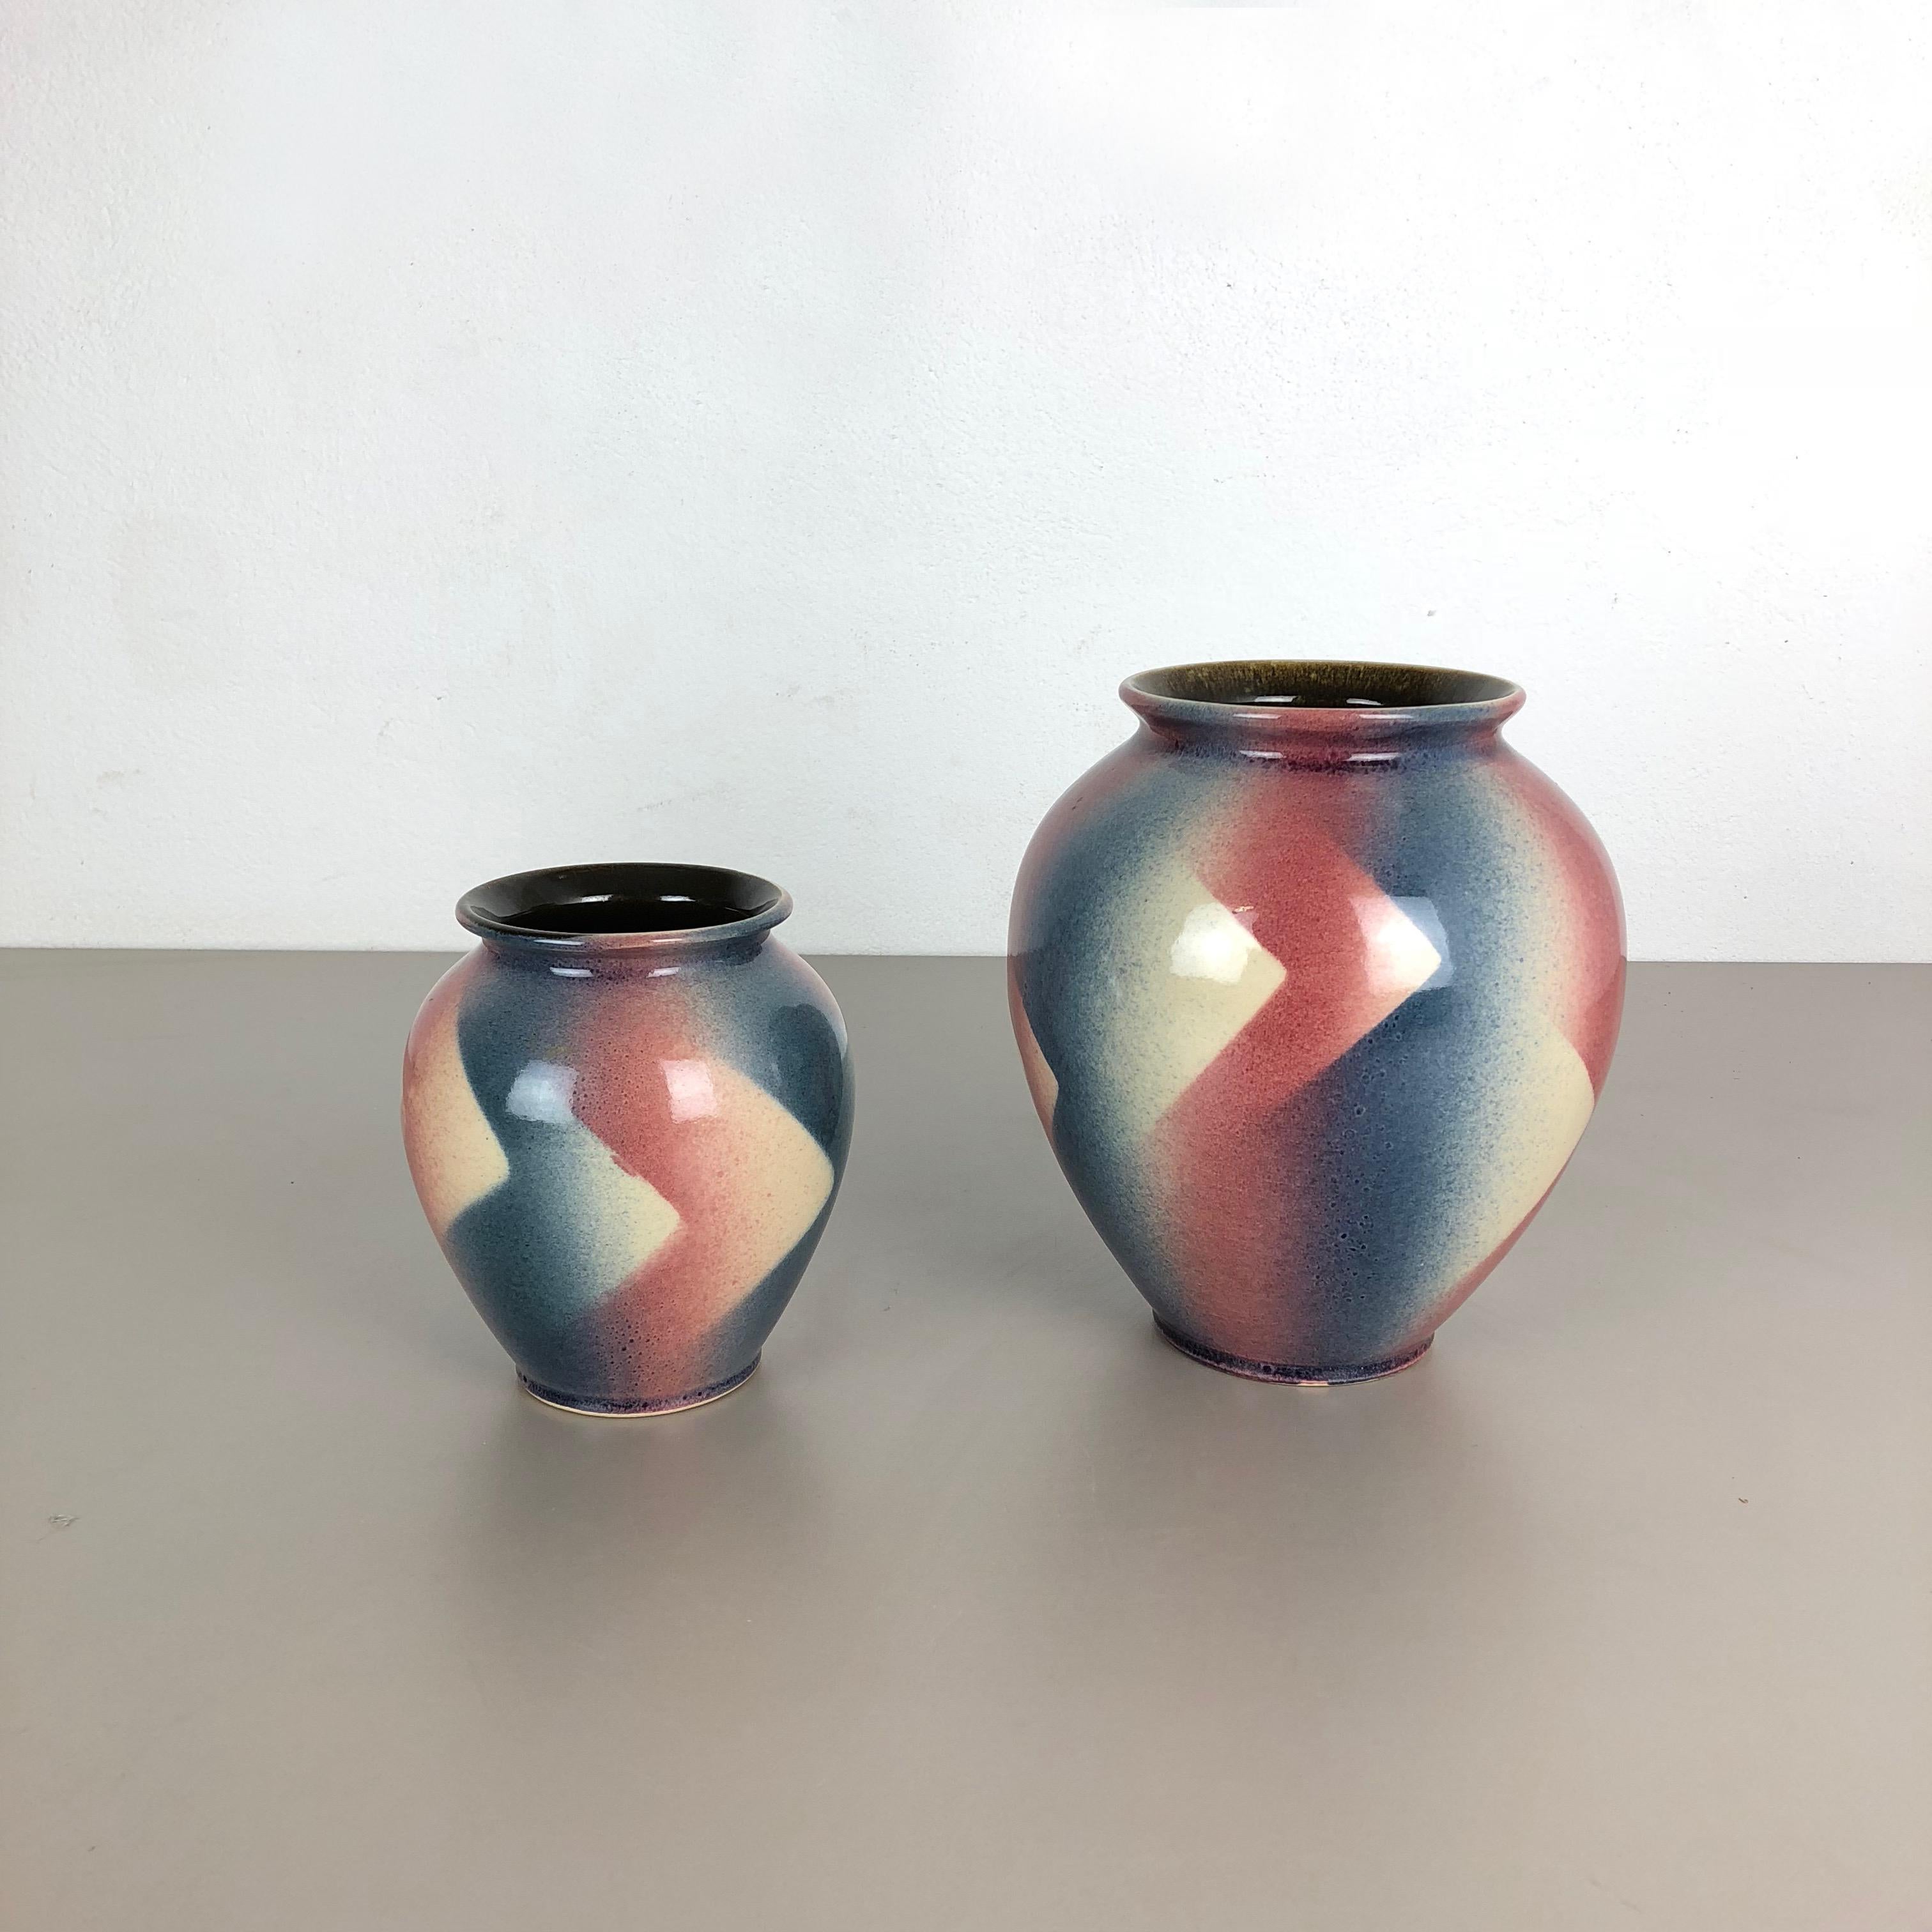 Article:

Pottery ceramic vase spritzdekor set of 2


Producer:

BAY ceramic, Germany


Decade:

1950s





Set of 2 Ooiginal vintage 1950s pottery ceramic vases made in Germany. this et contains two vase from the same series in